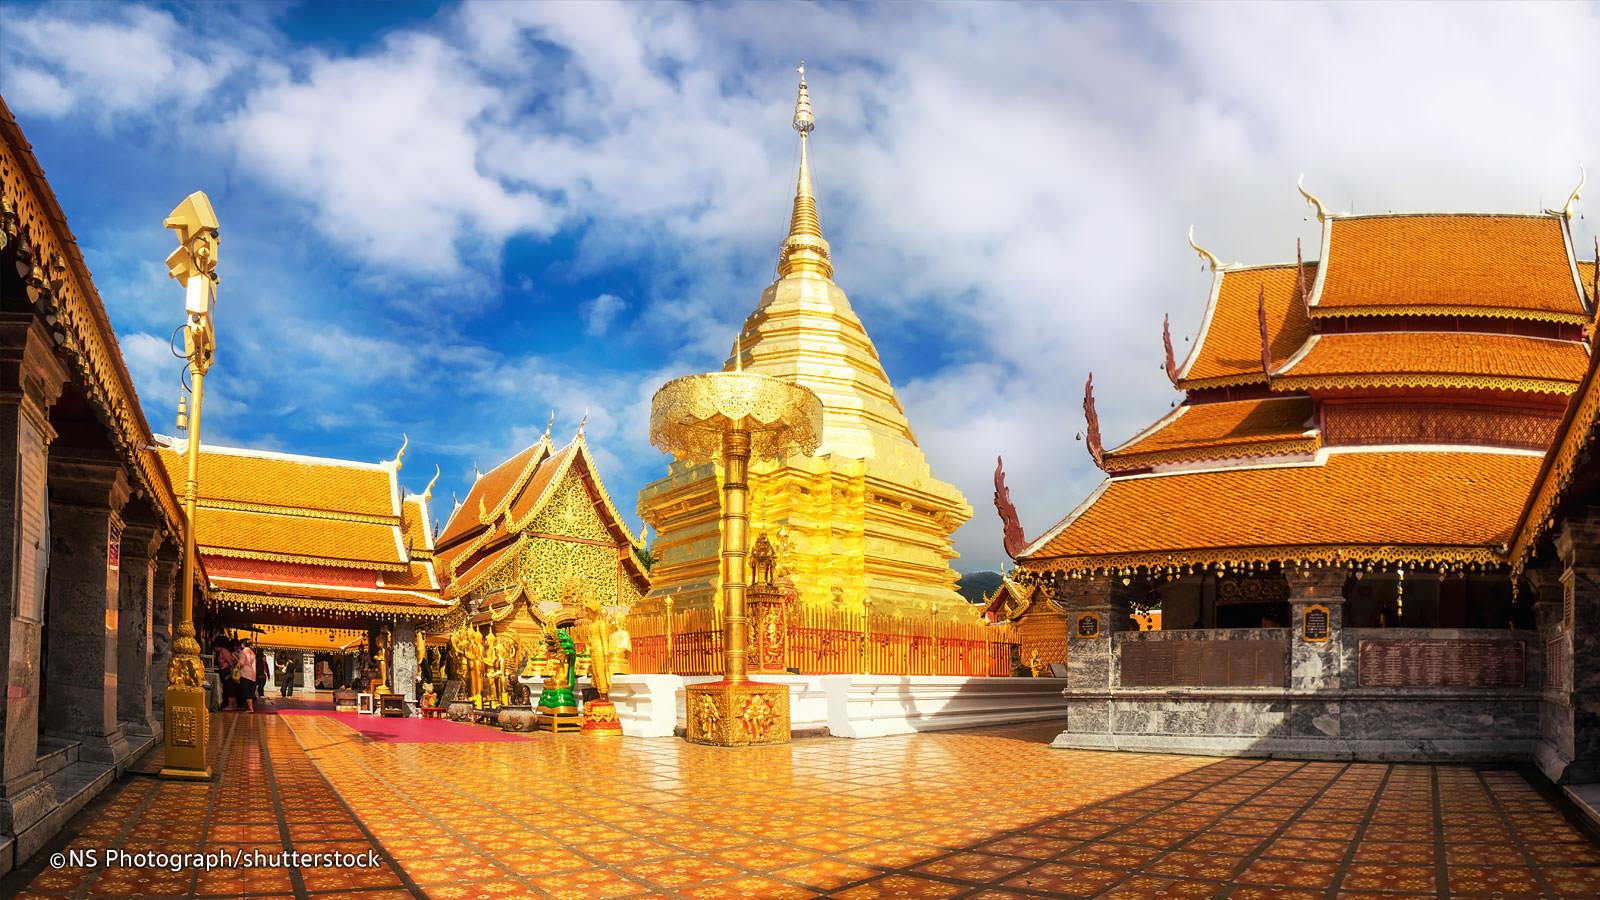 Doi Suthep in Chiang Mai: Large Photo and VDO of Chiang Mai Temples